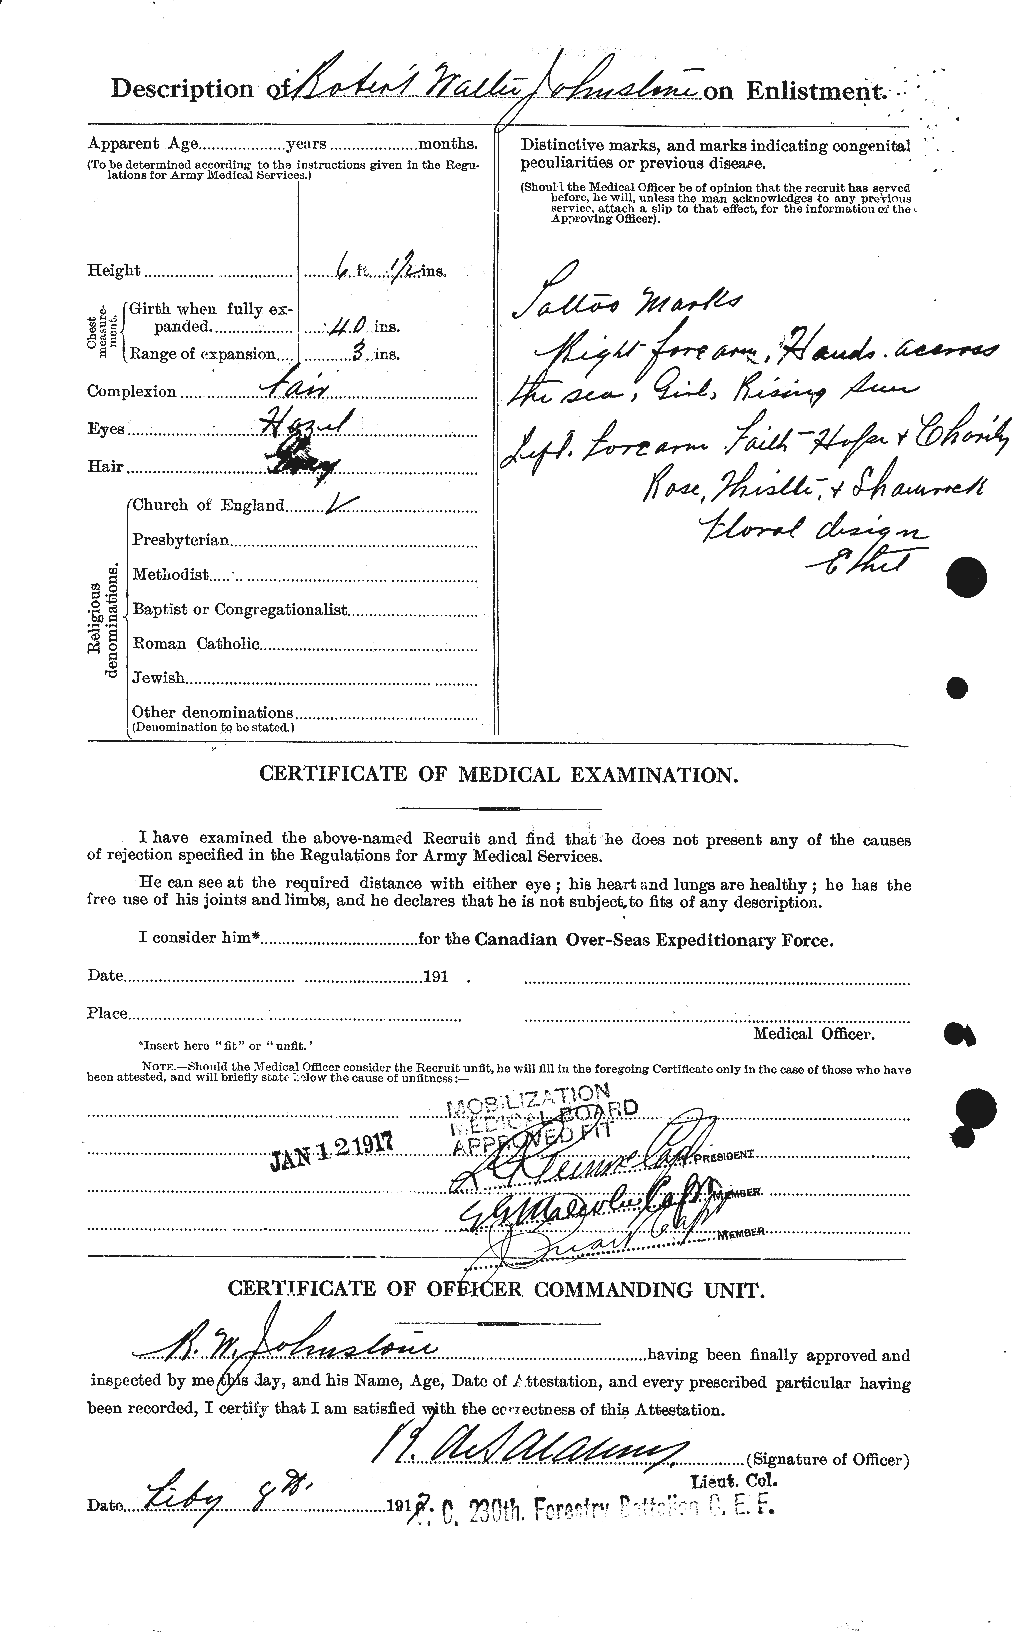 Personnel Records of the First World War - CEF 427041b